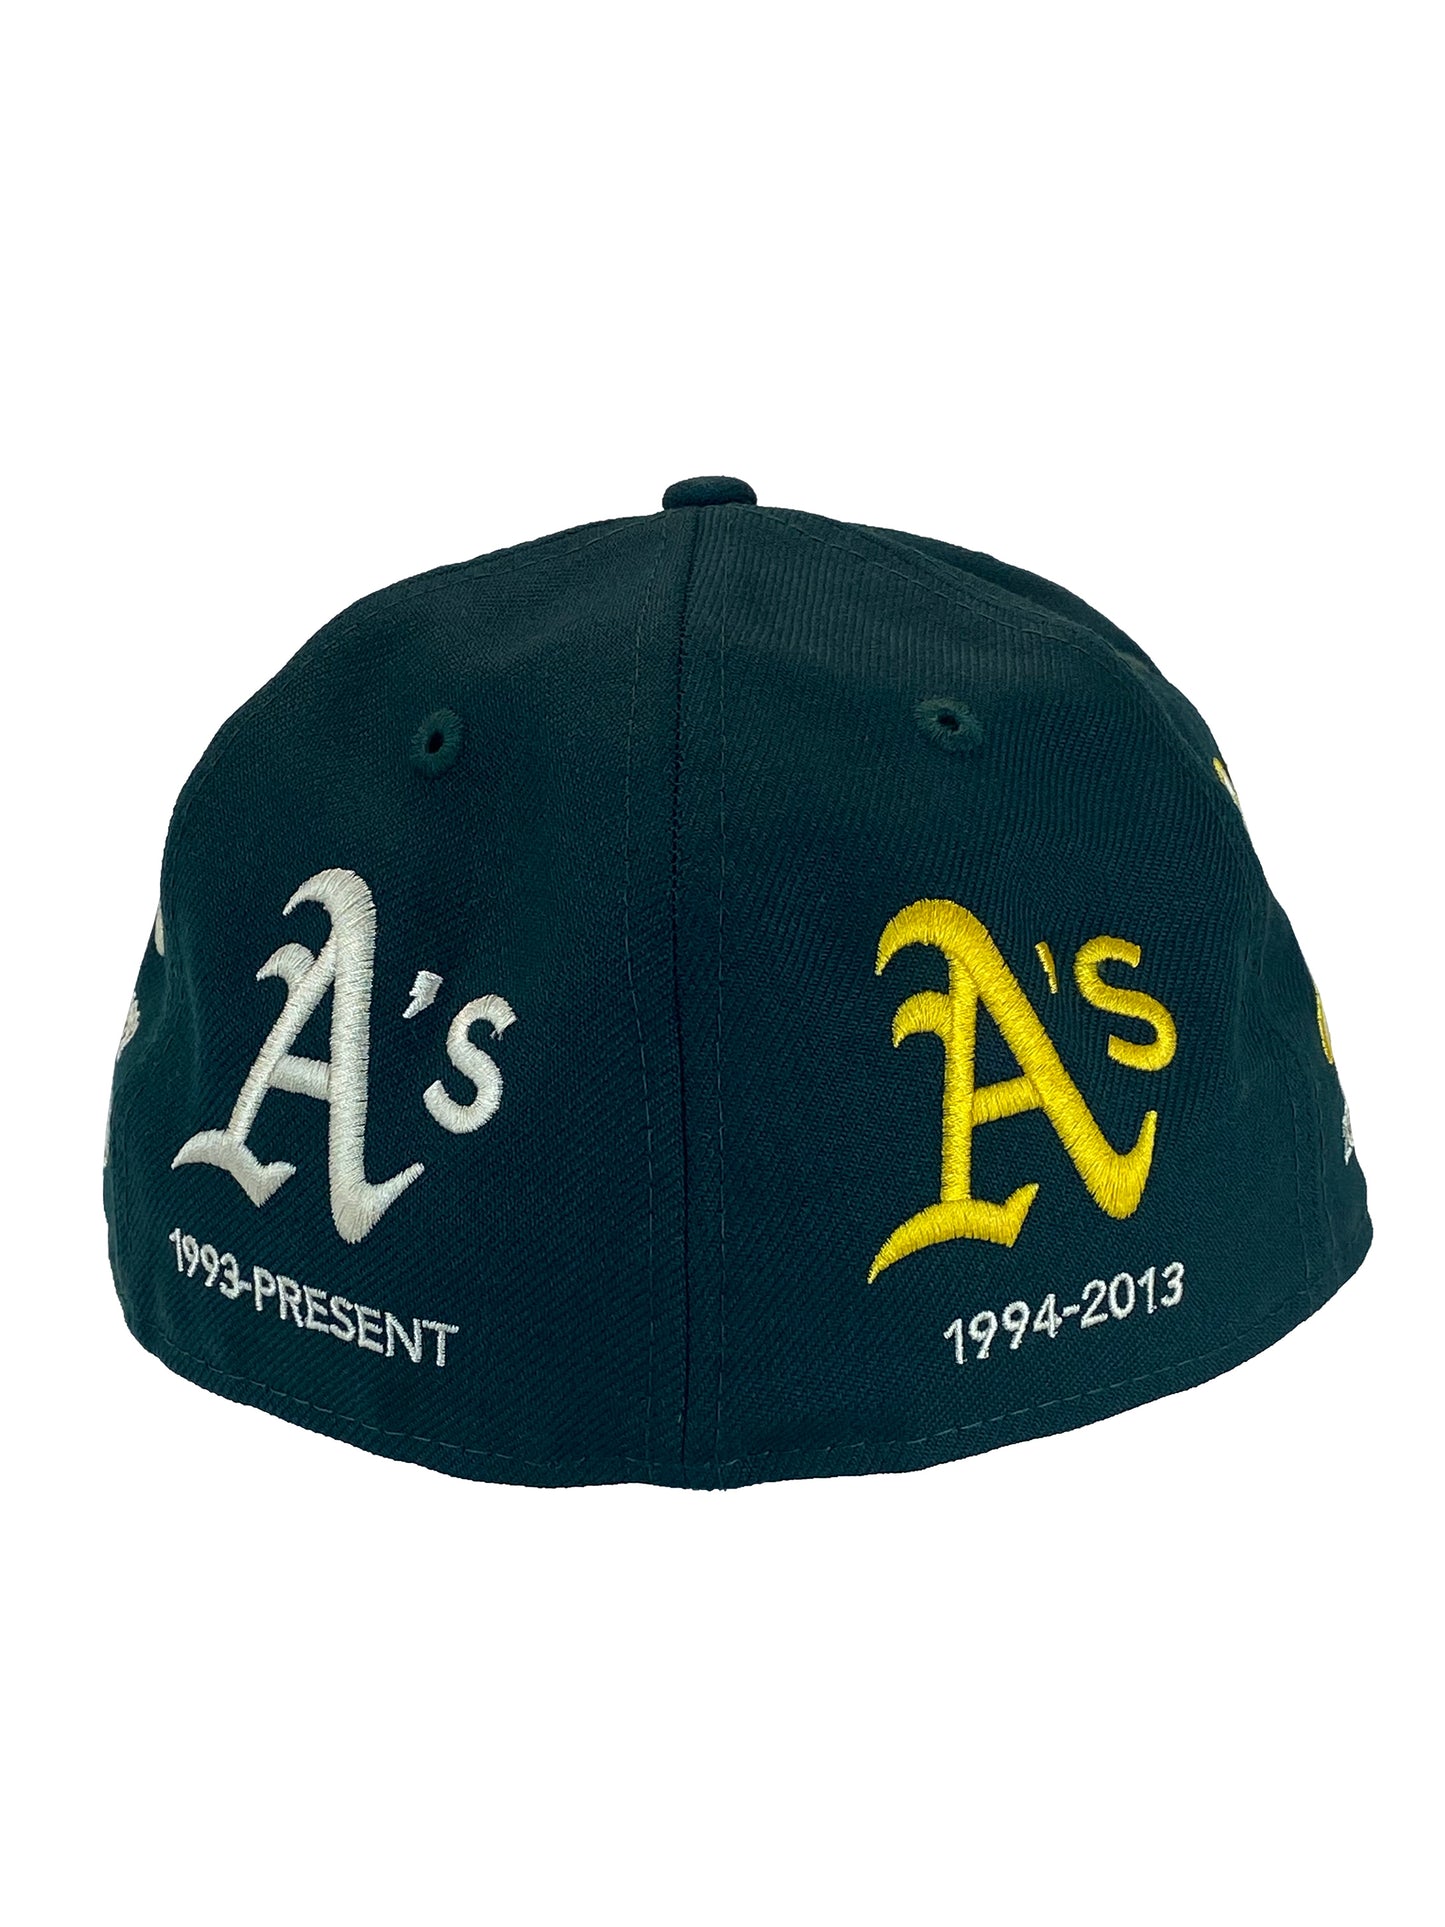 OAKLAND ATHLETICS LIFE QUARTER 59FIFTY FITTED